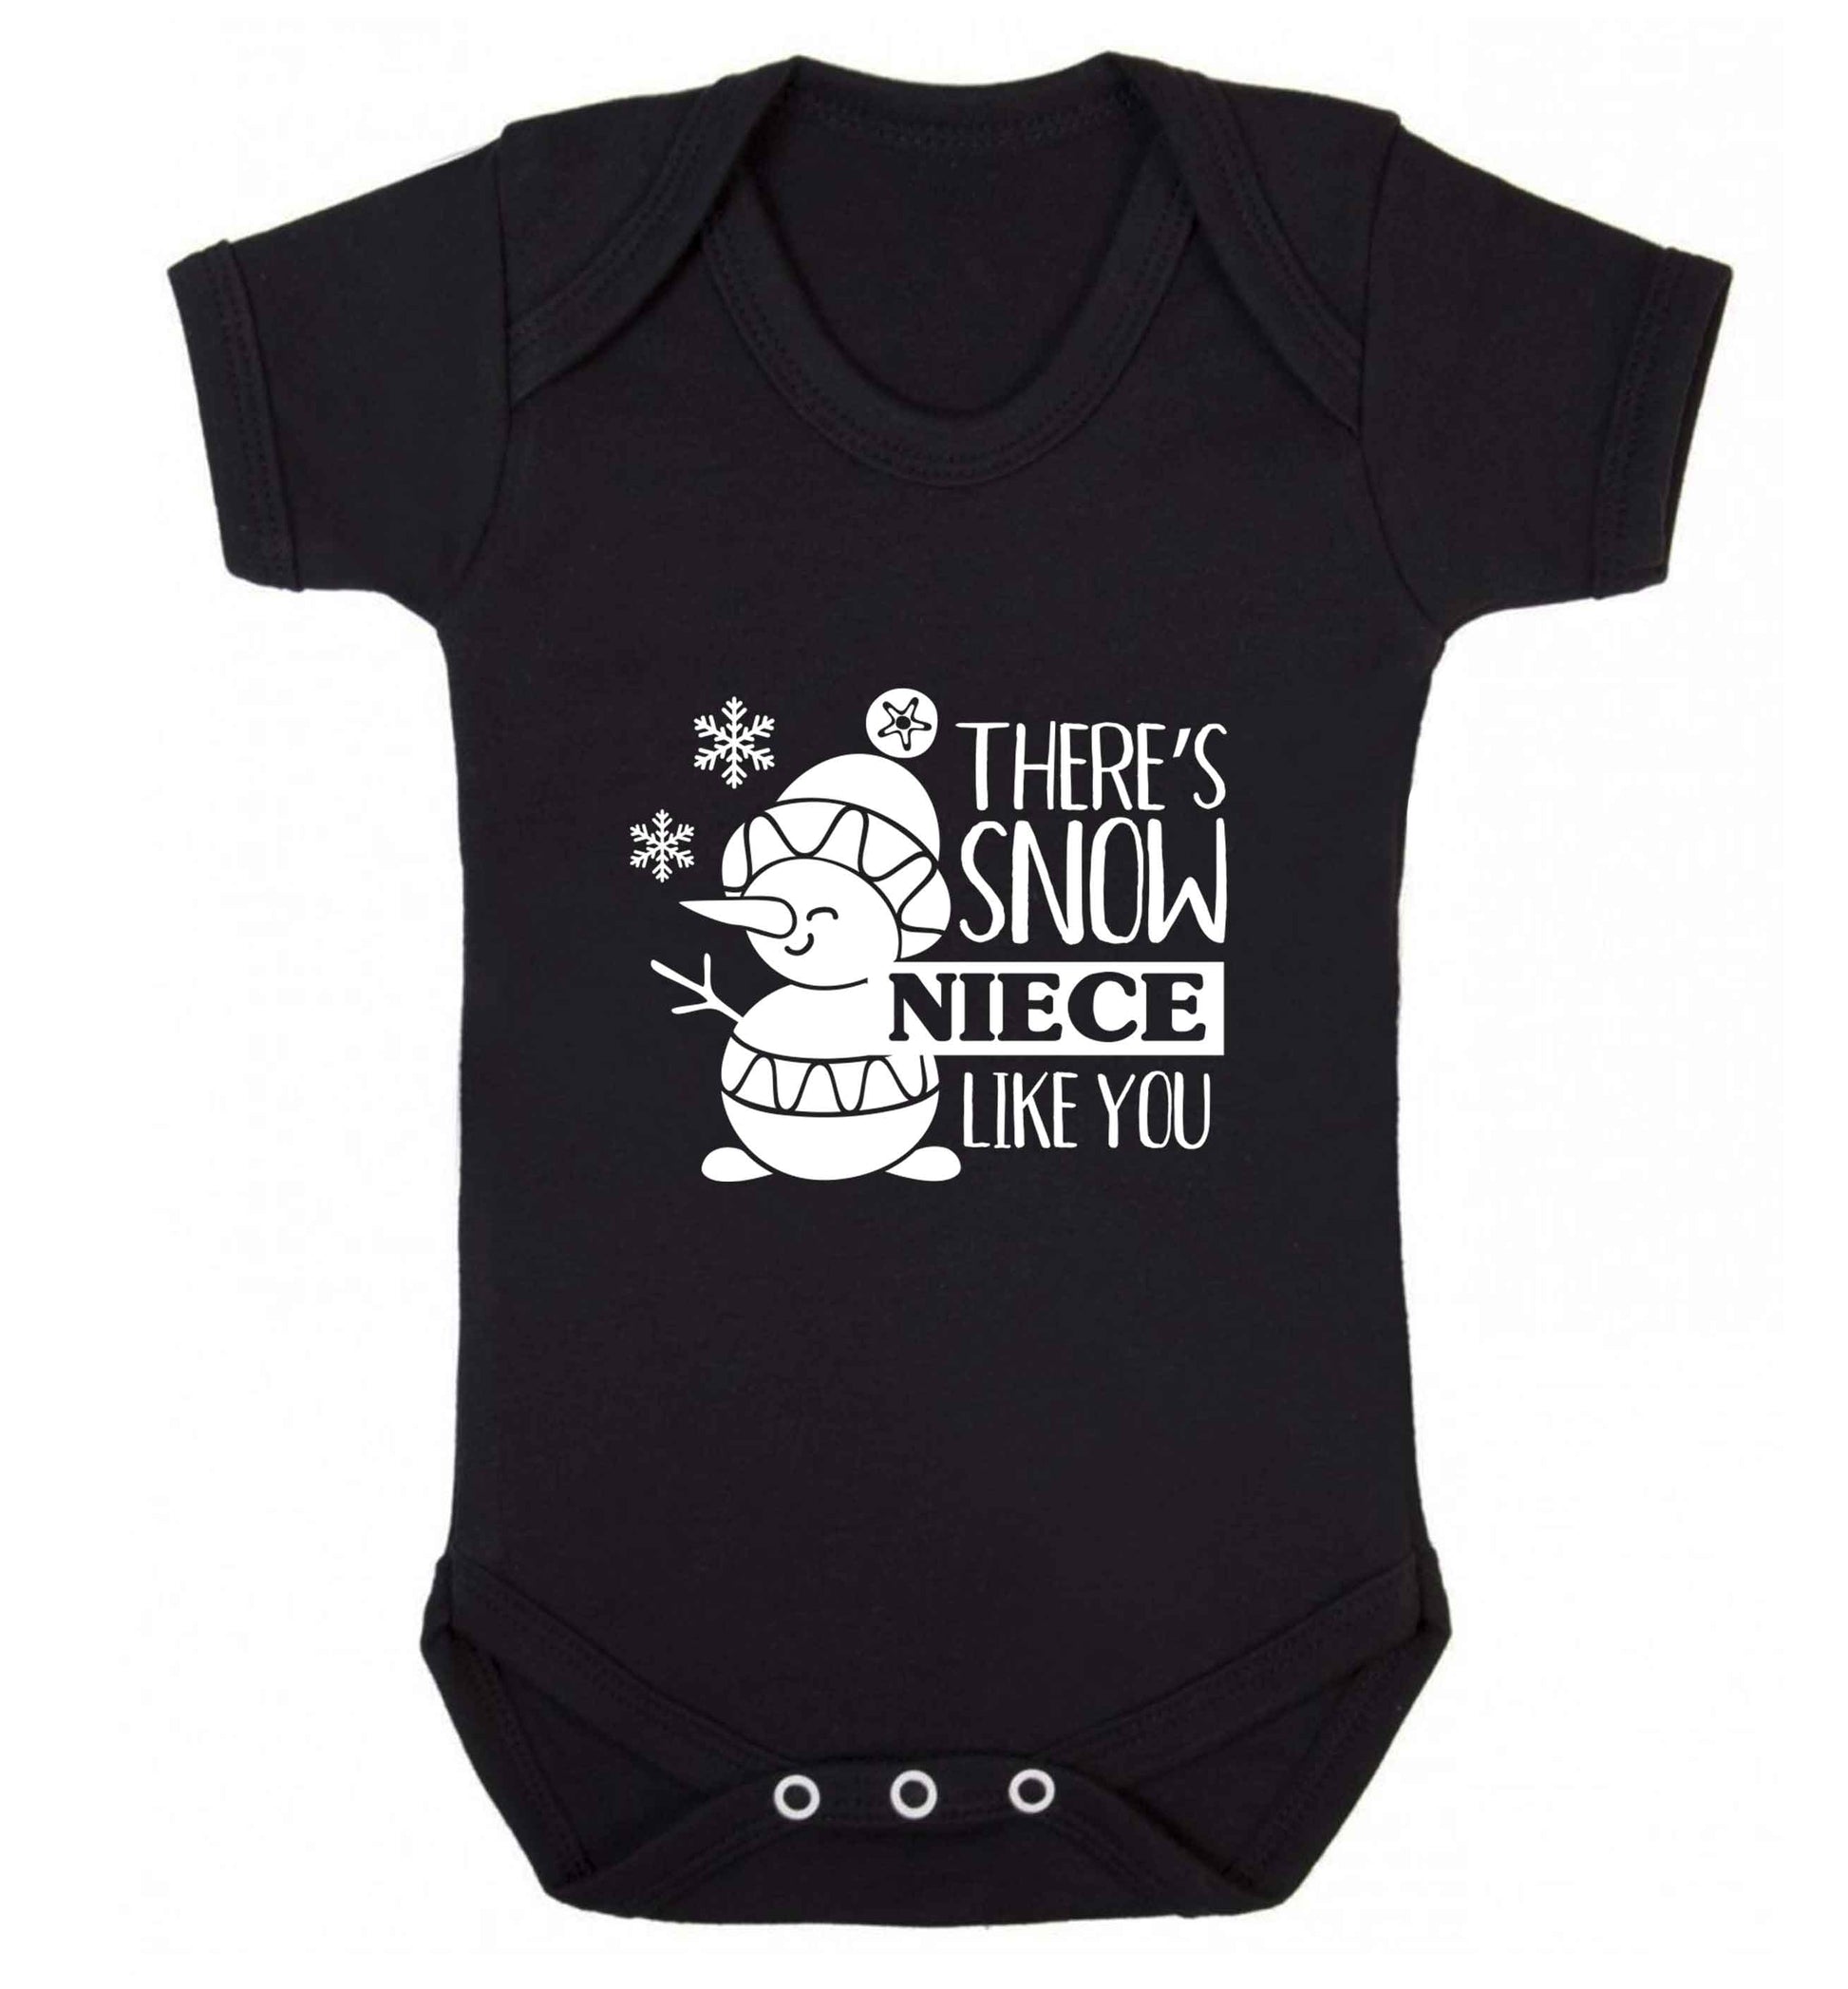 There's snow niece like you baby vest black 18-24 months